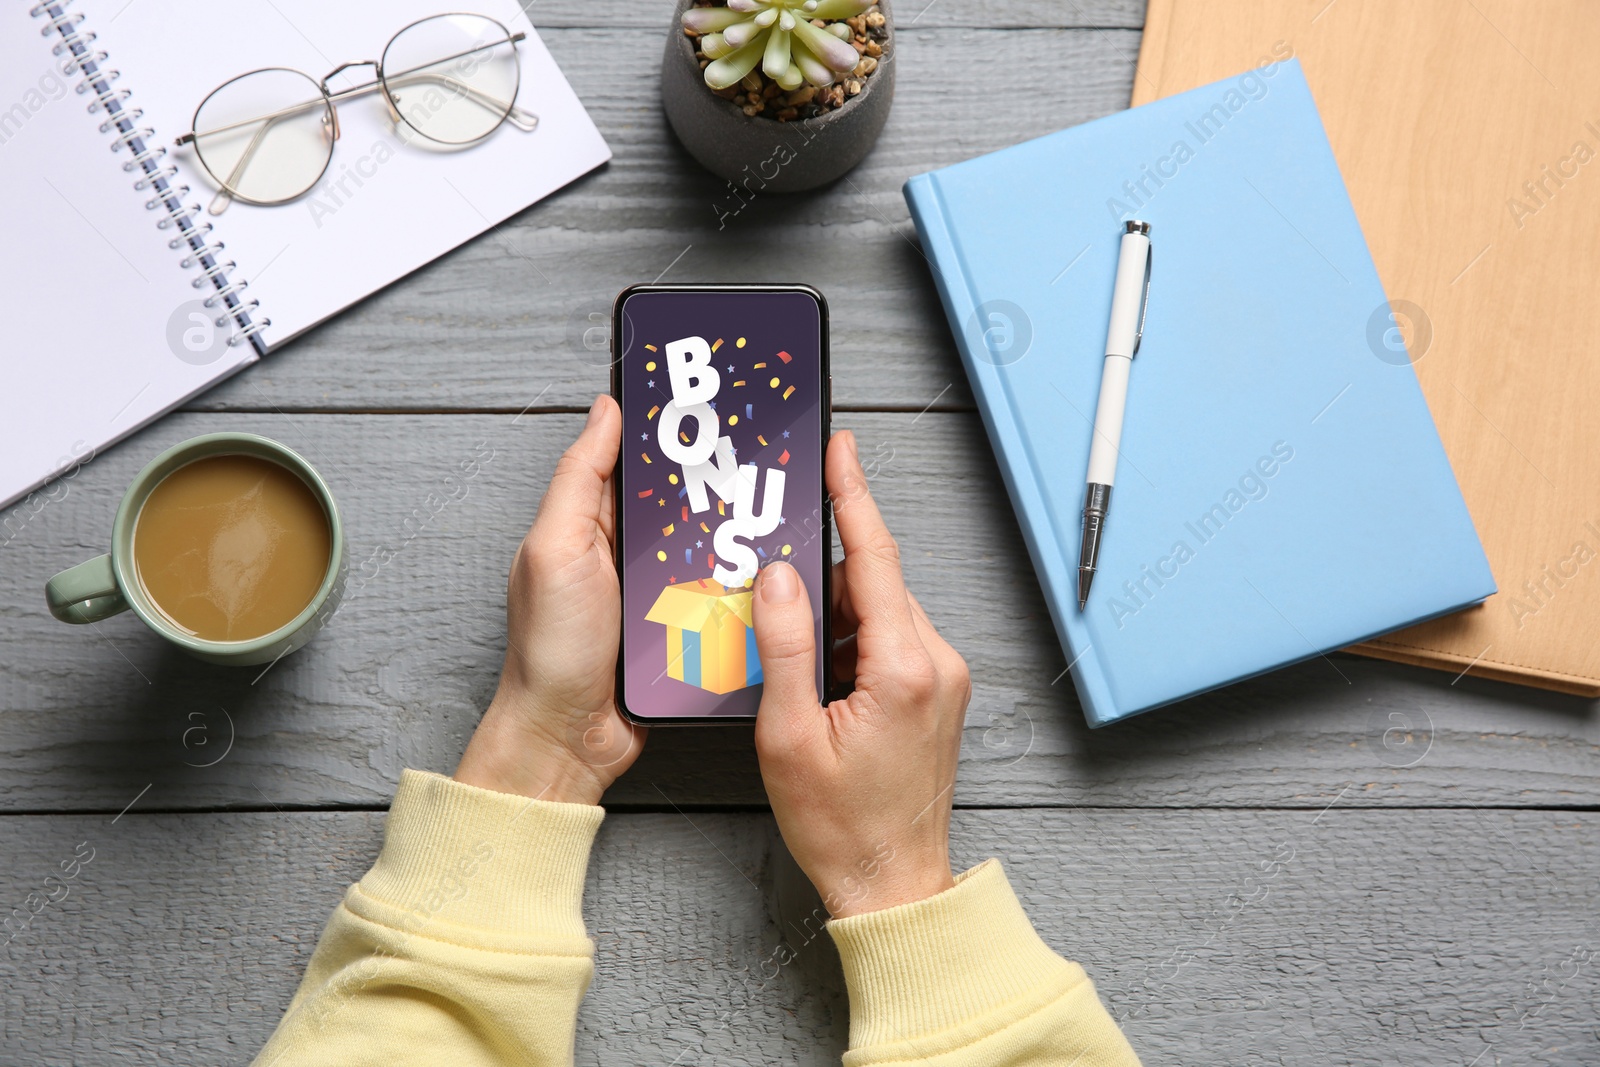 Image of Bonus gaining. Woman holding smartphone at grey wooden table, top view. Illustration of open gift box, word and confetti on device screen